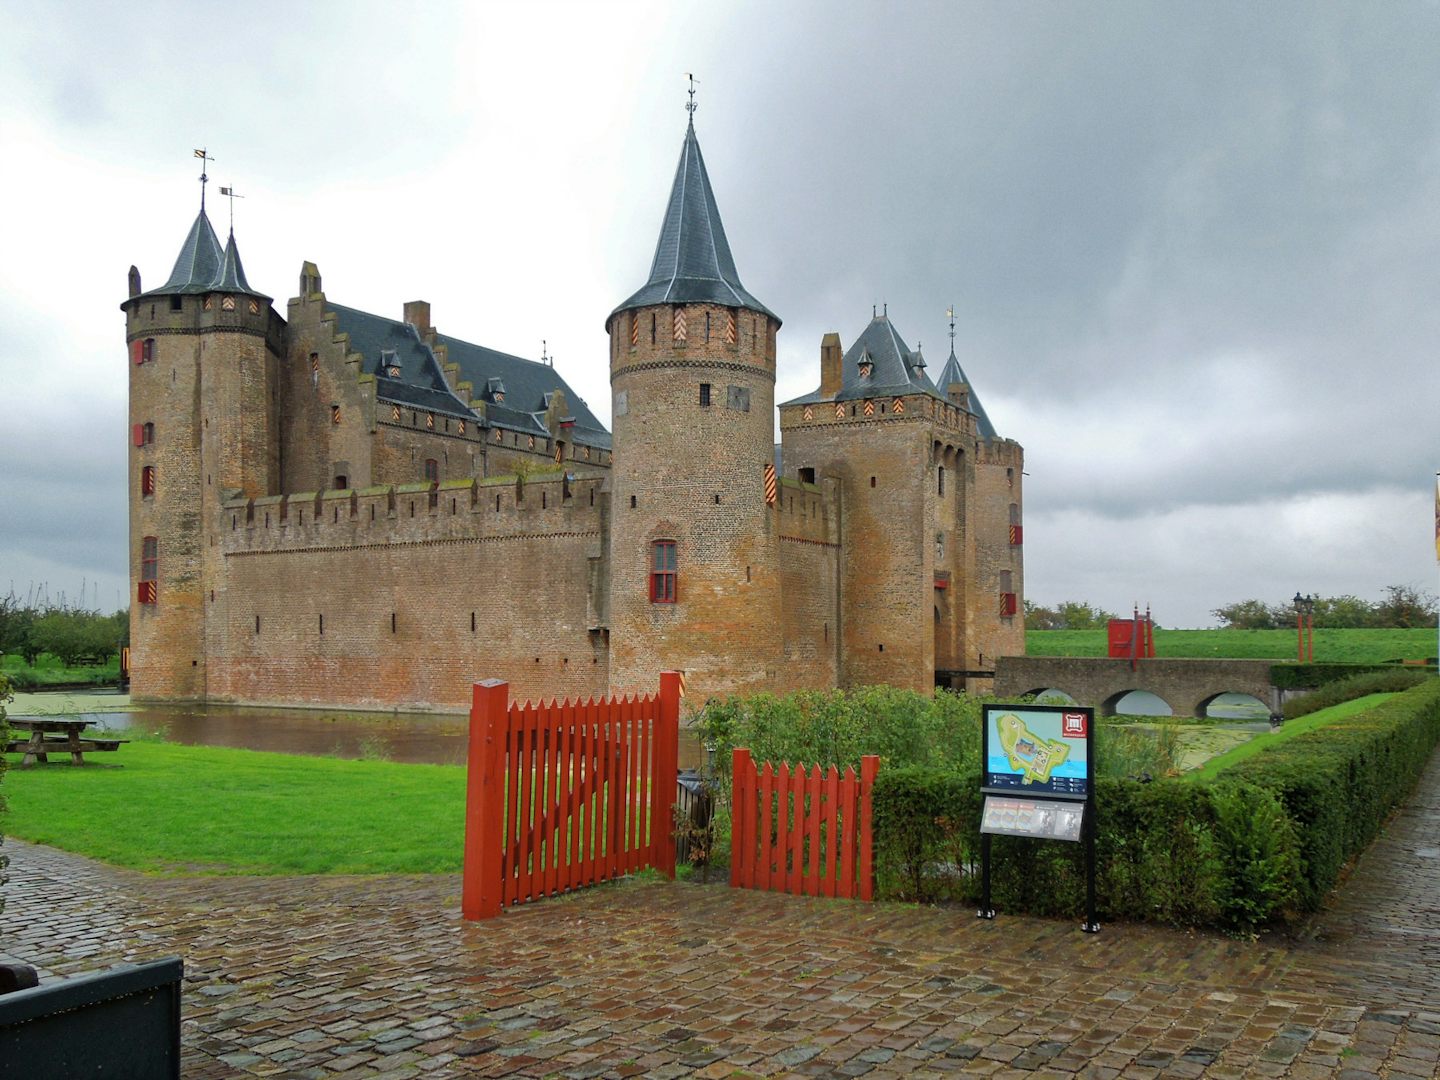 We visited Castle Muiderslot outside of Amsterdam on the tour from our Aval